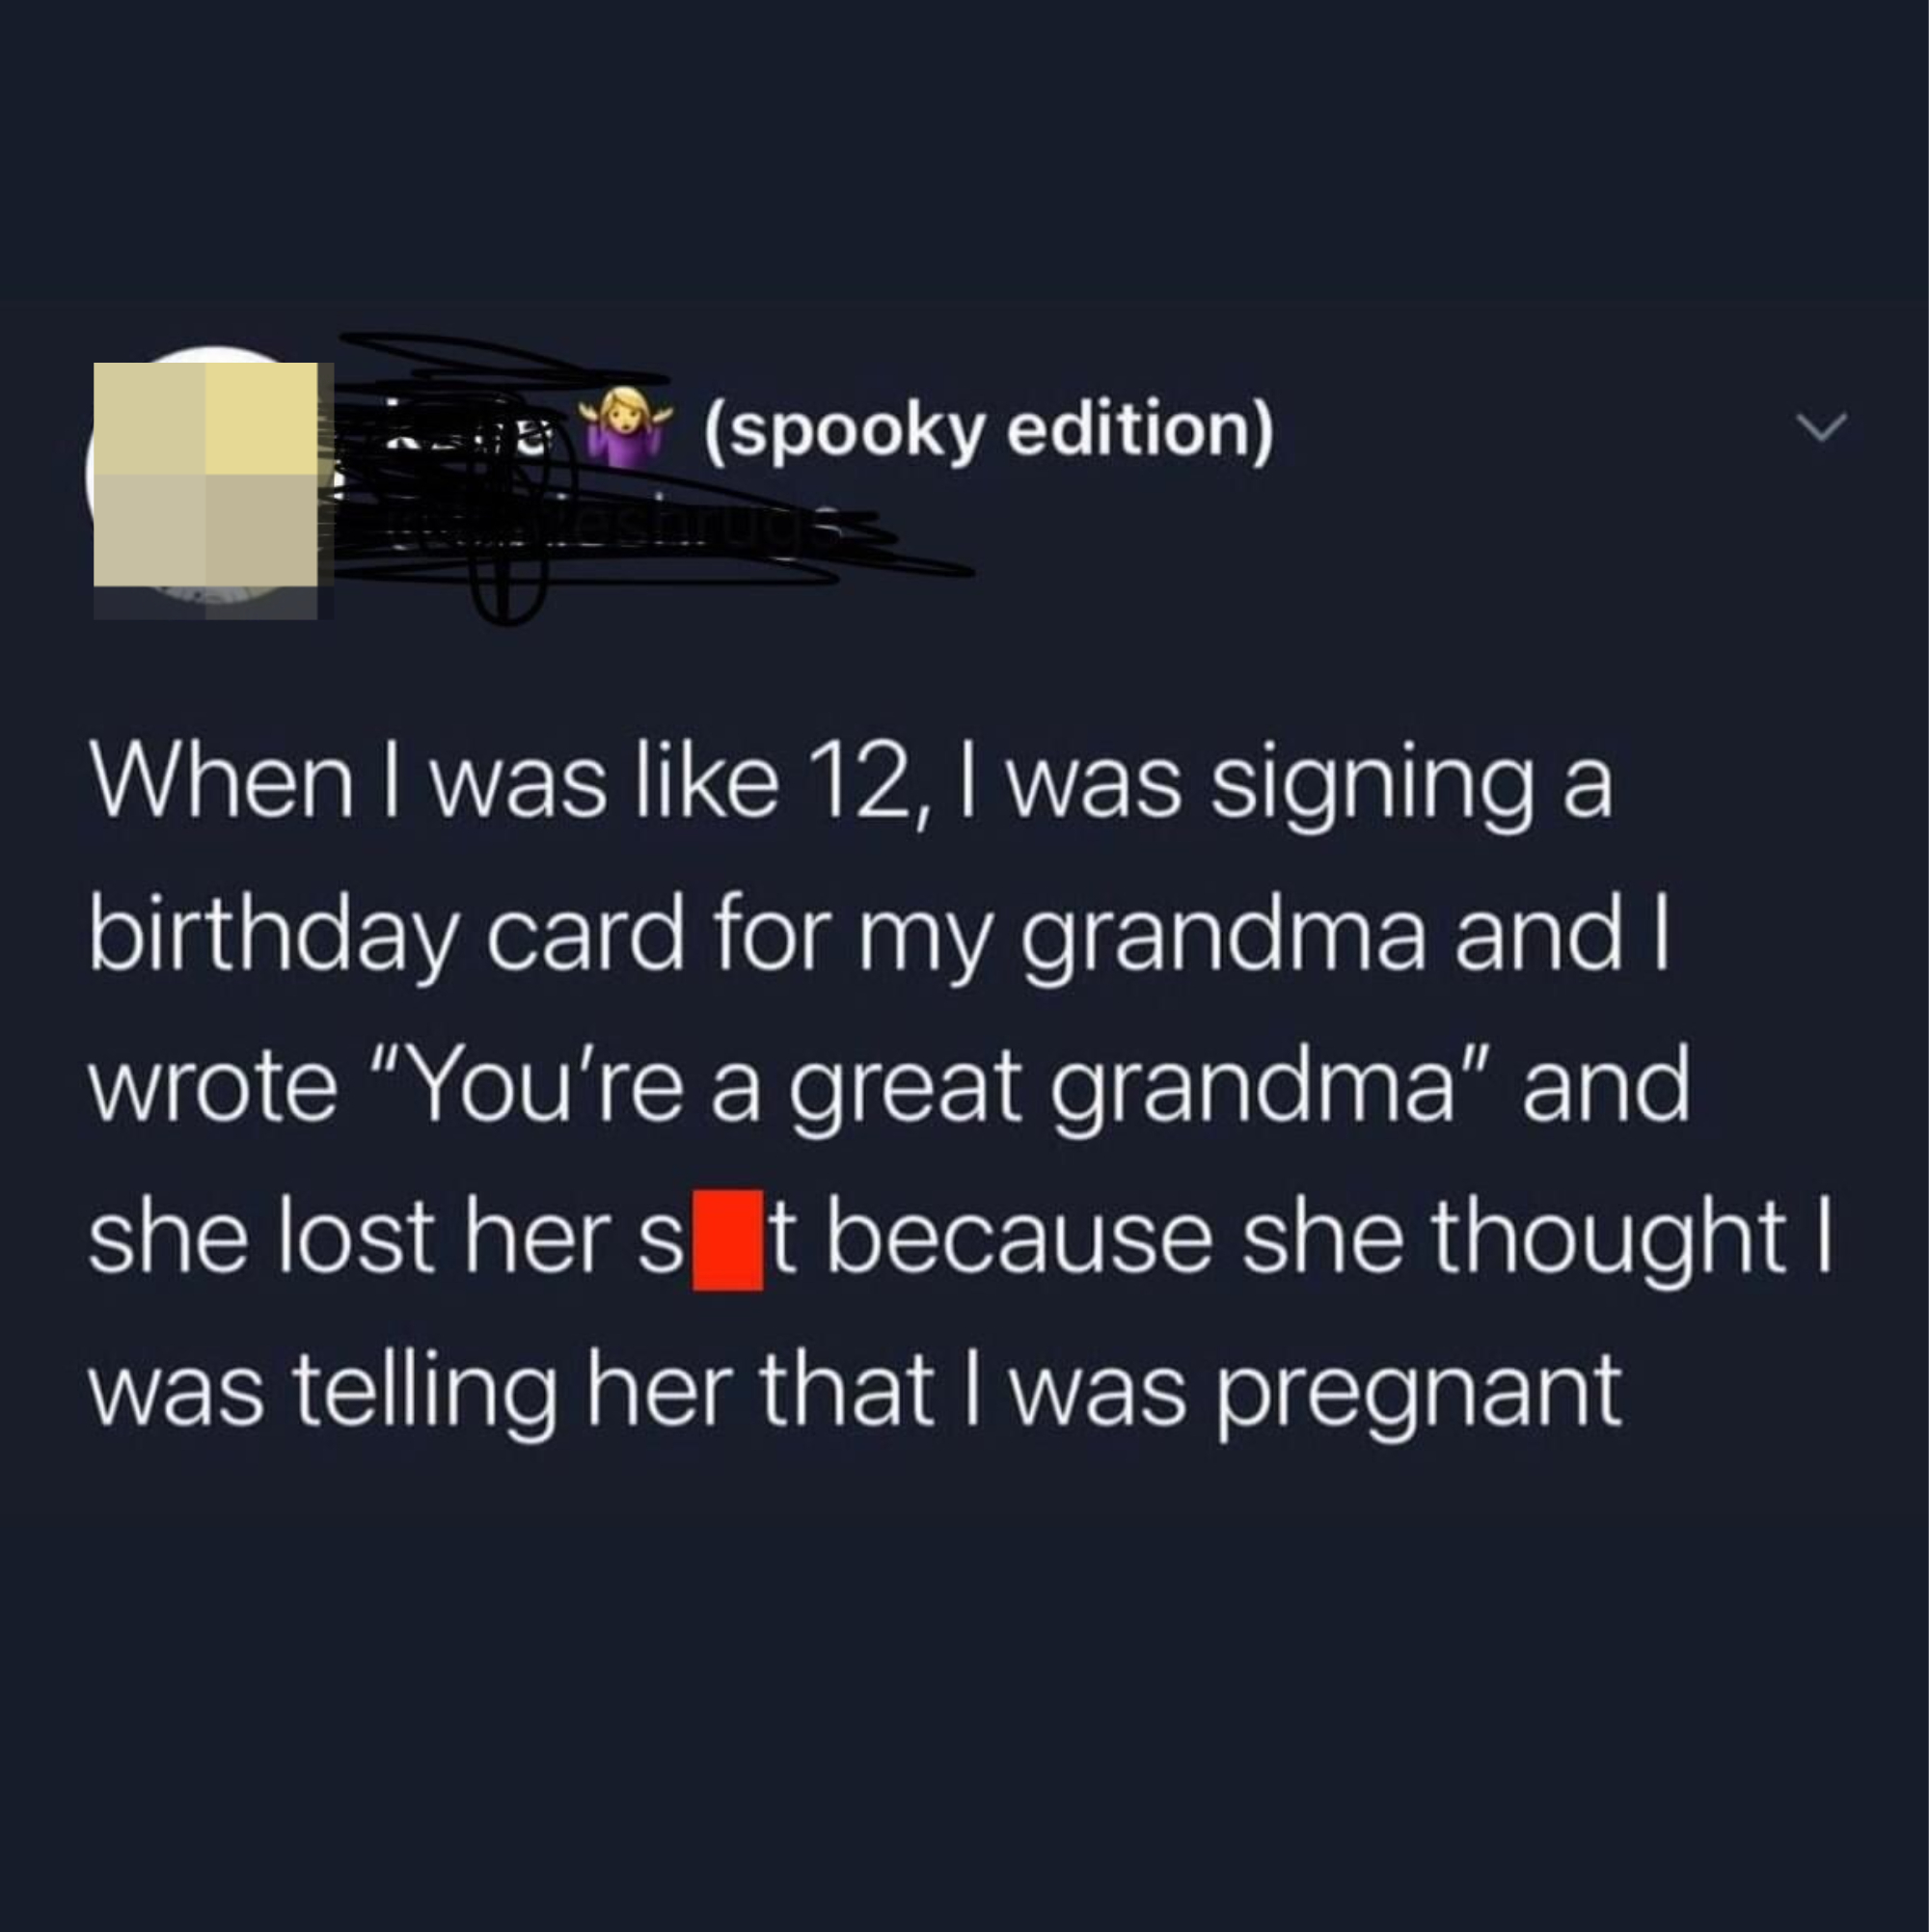 Tweet reading &quot;When i was 12, i was signing a birthday card for my grandma and i wrote &#x27;You&#x27;re a great grandma&#x27; and she lost her shit because she thought i was telling her i was pregnant&quot;